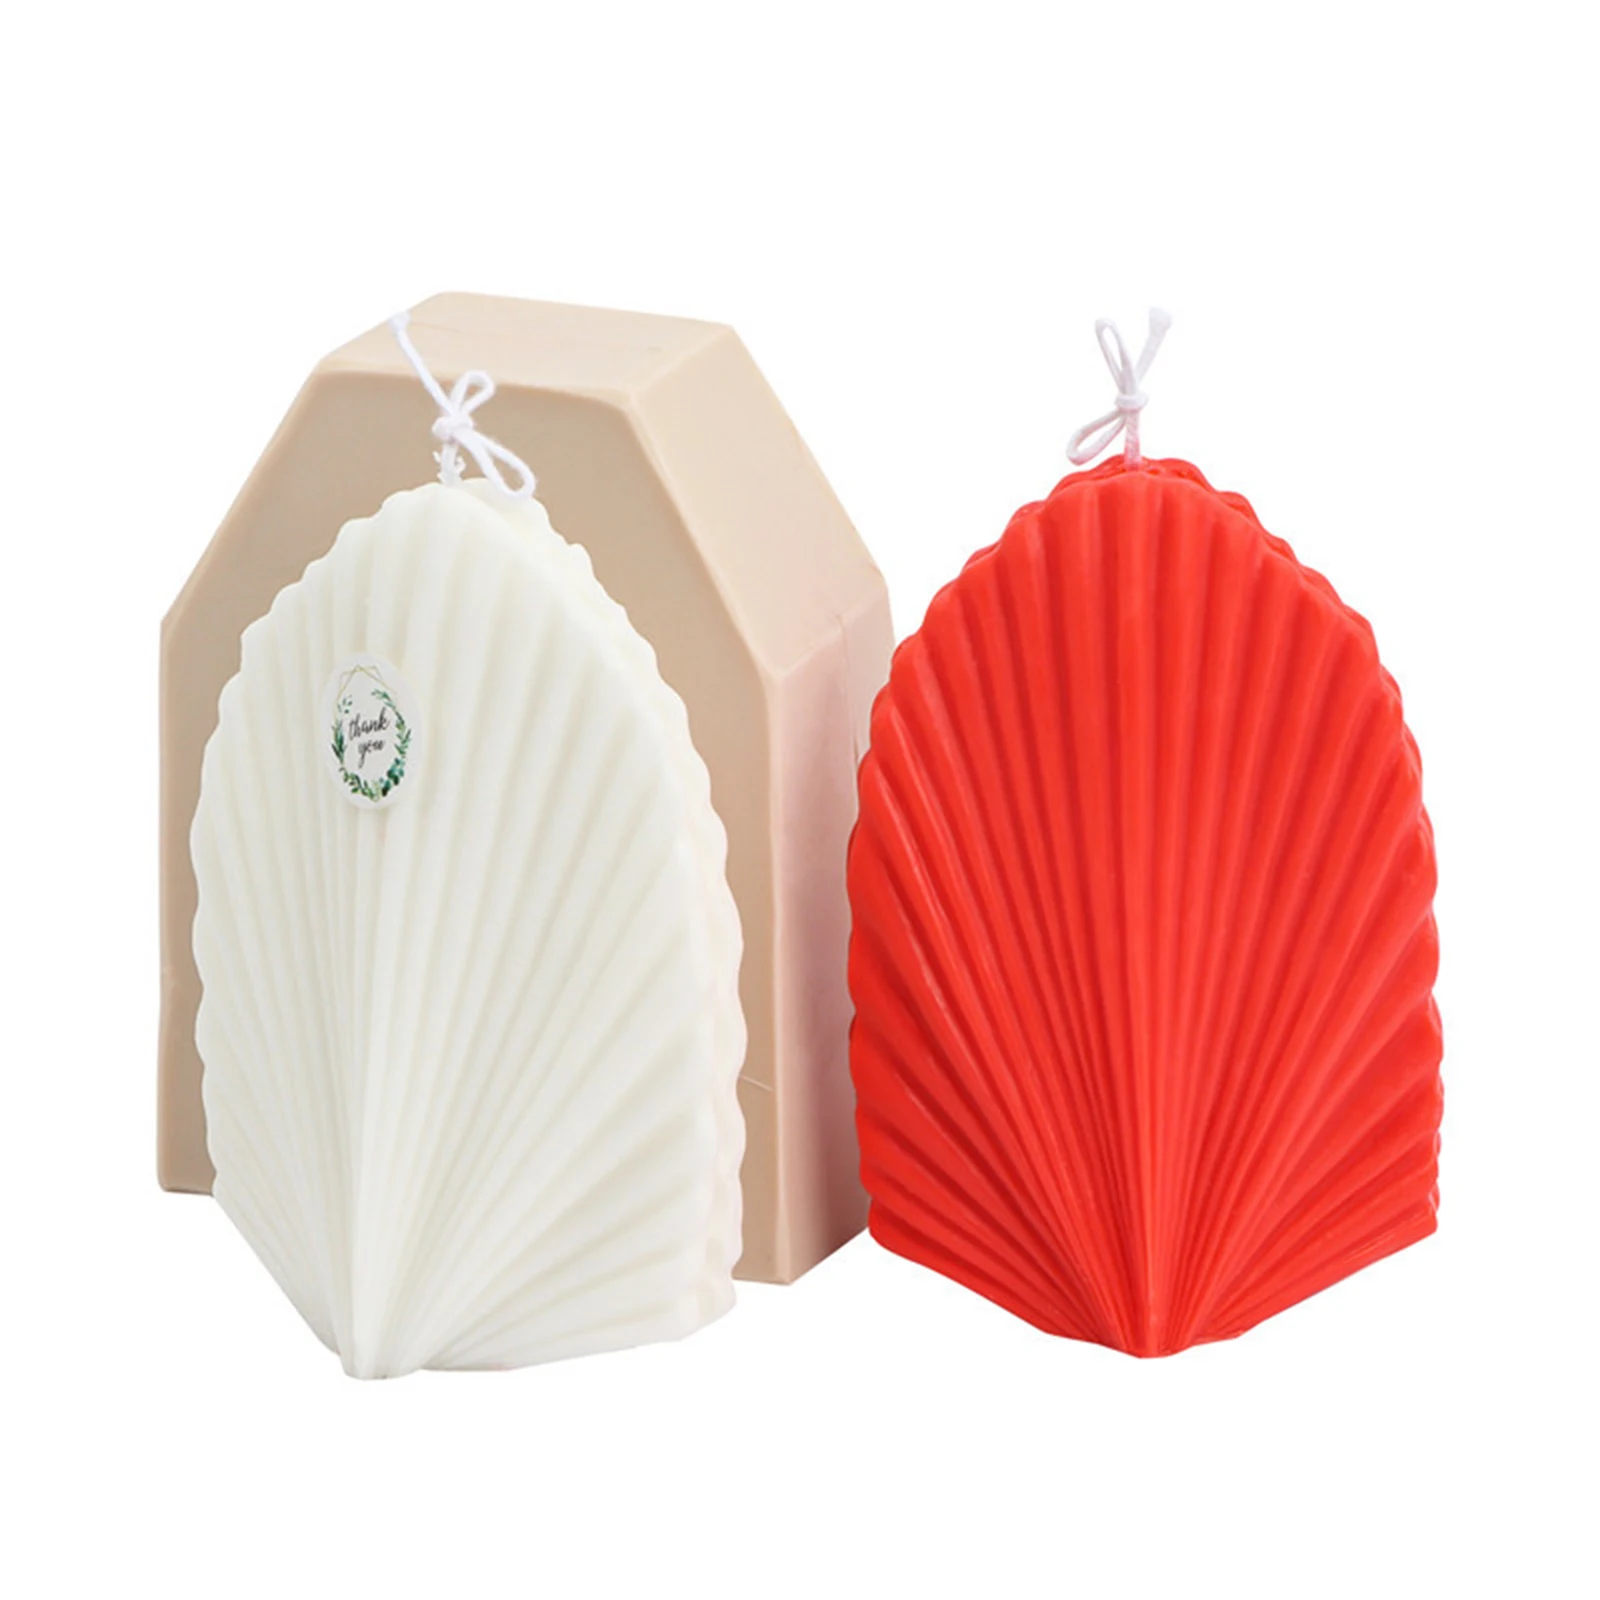 

3D Seashell Candle Mould Scented Candle Mold Handmade Candle Making Shell Aromatherapy Plaster Molds Silicone Scallop Soap Mold